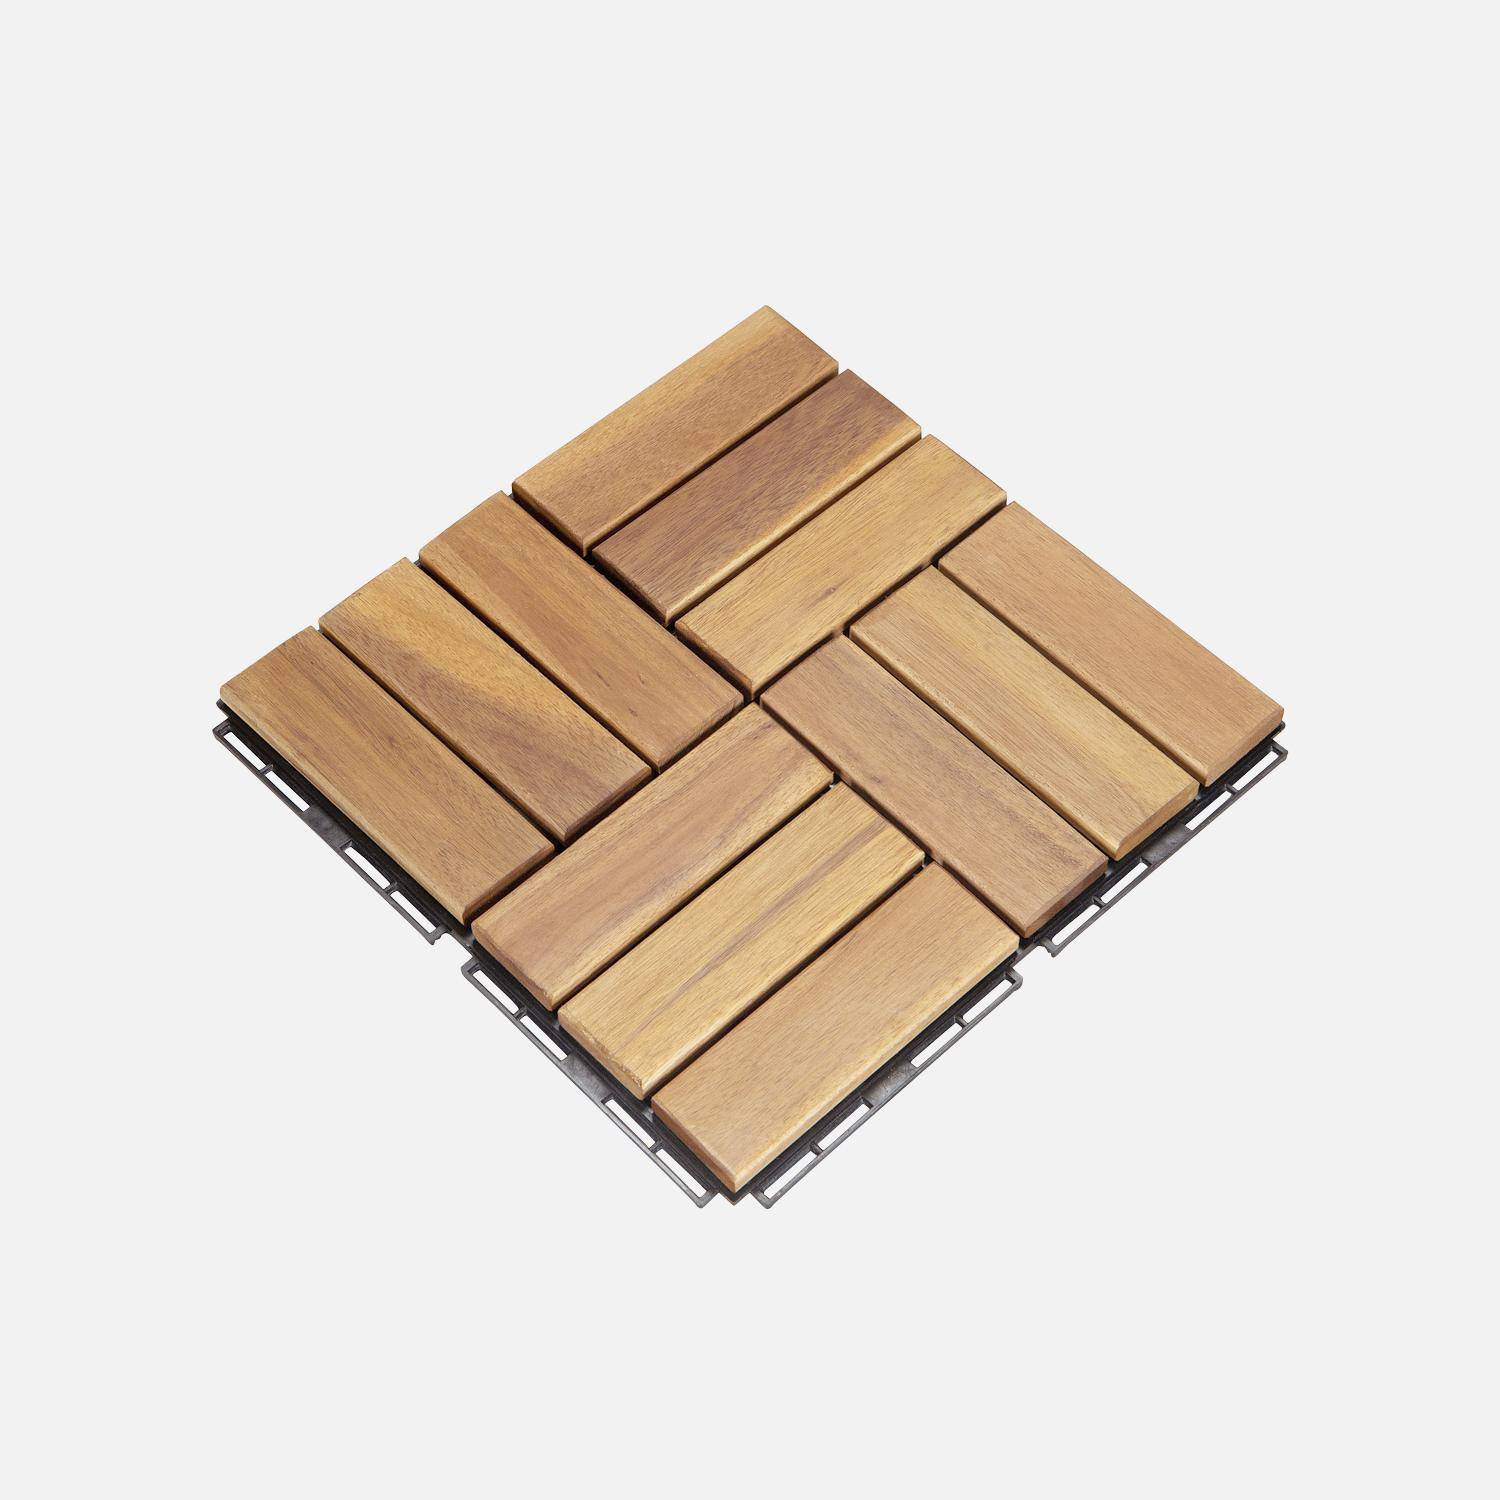 Pack of 10 acacia wood decking tiles 30x30cm, square pattern, clip-on,sweeek,Photo2